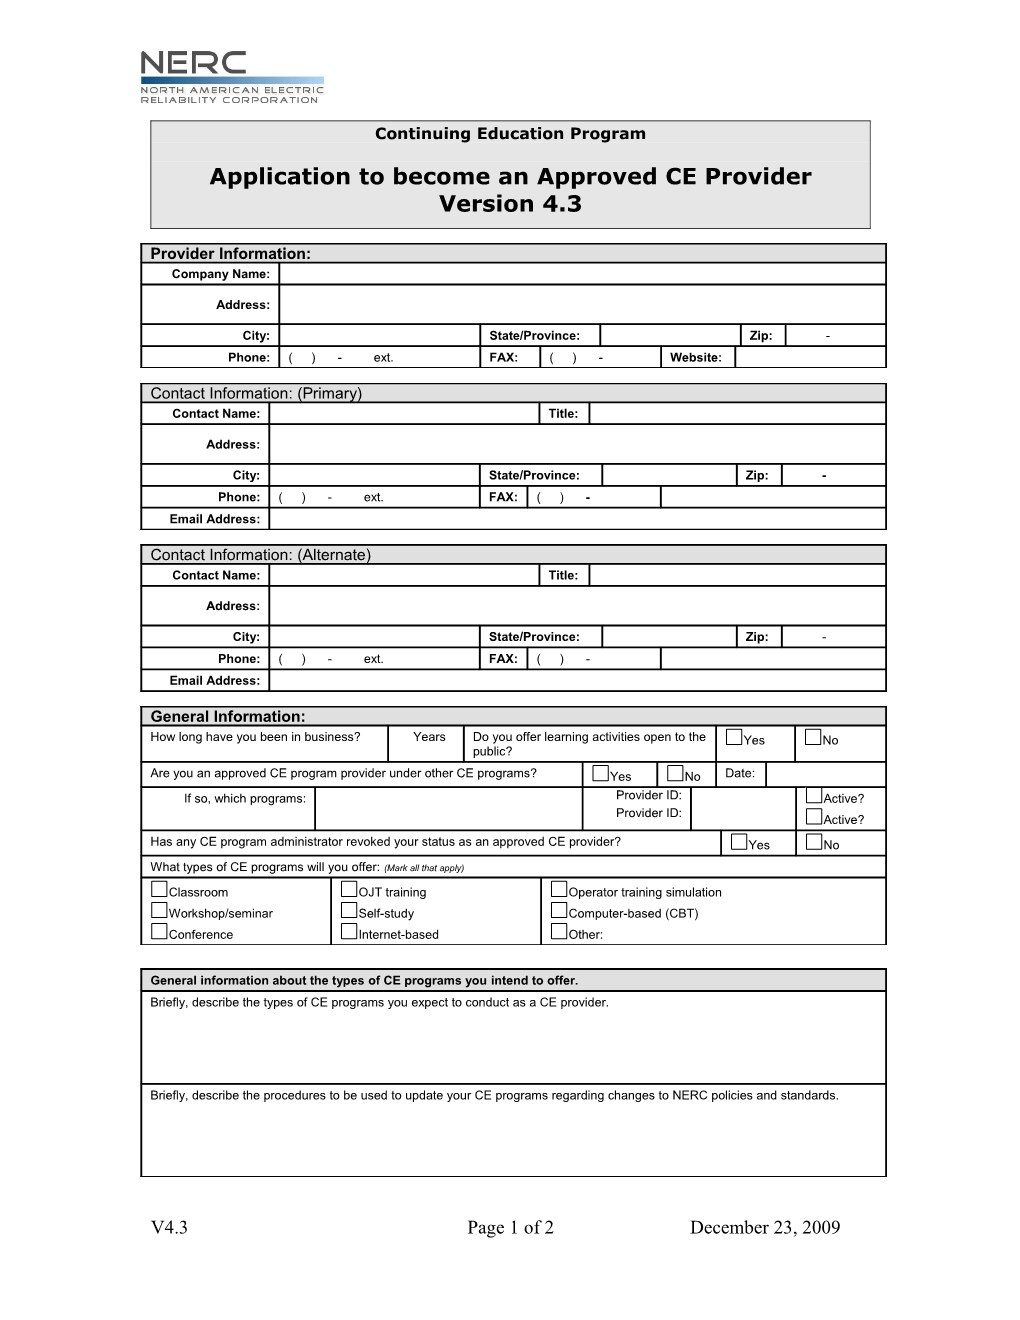 Please Type Or Submit This Application Electronically